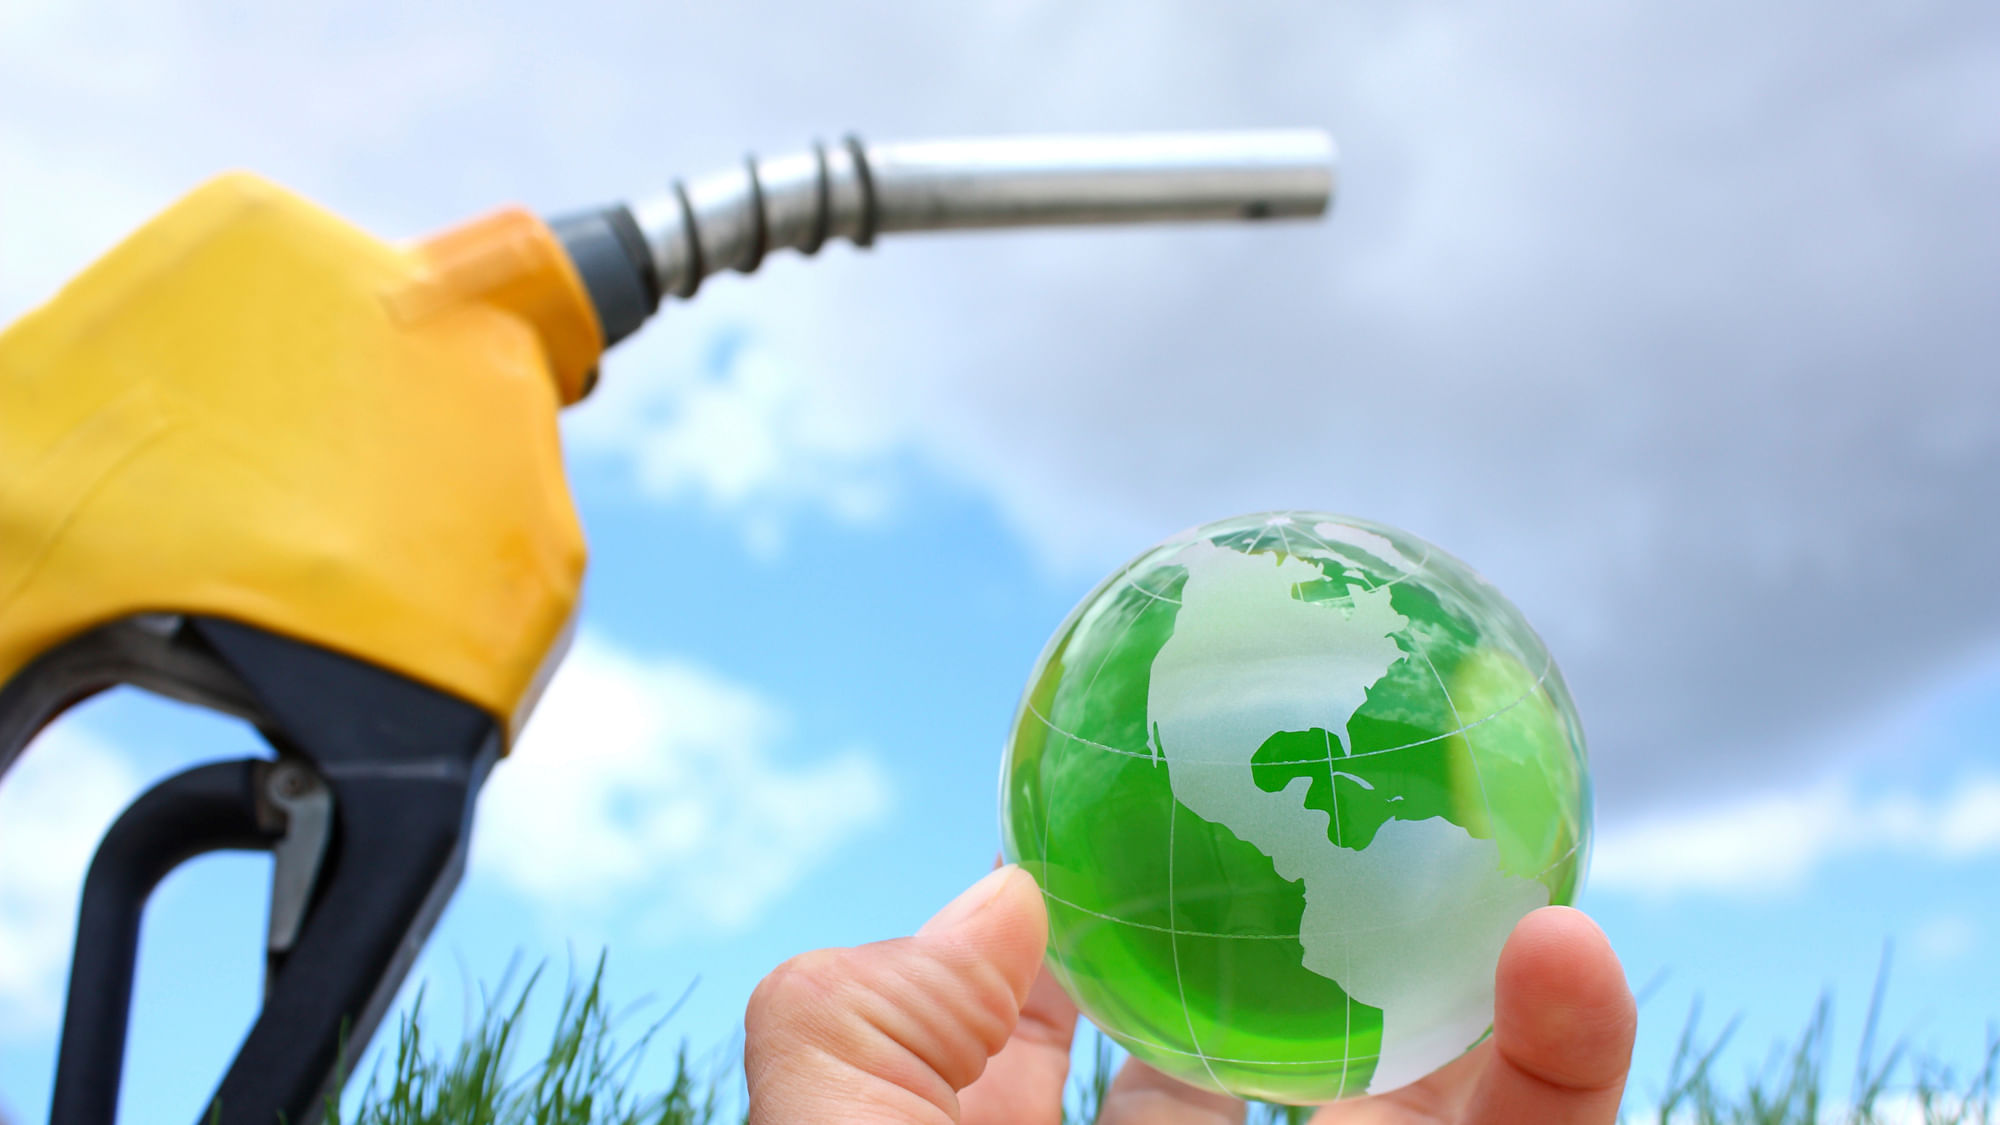 Focus on biofuels has increased over the past few decades. (Photo: iStockphoto)